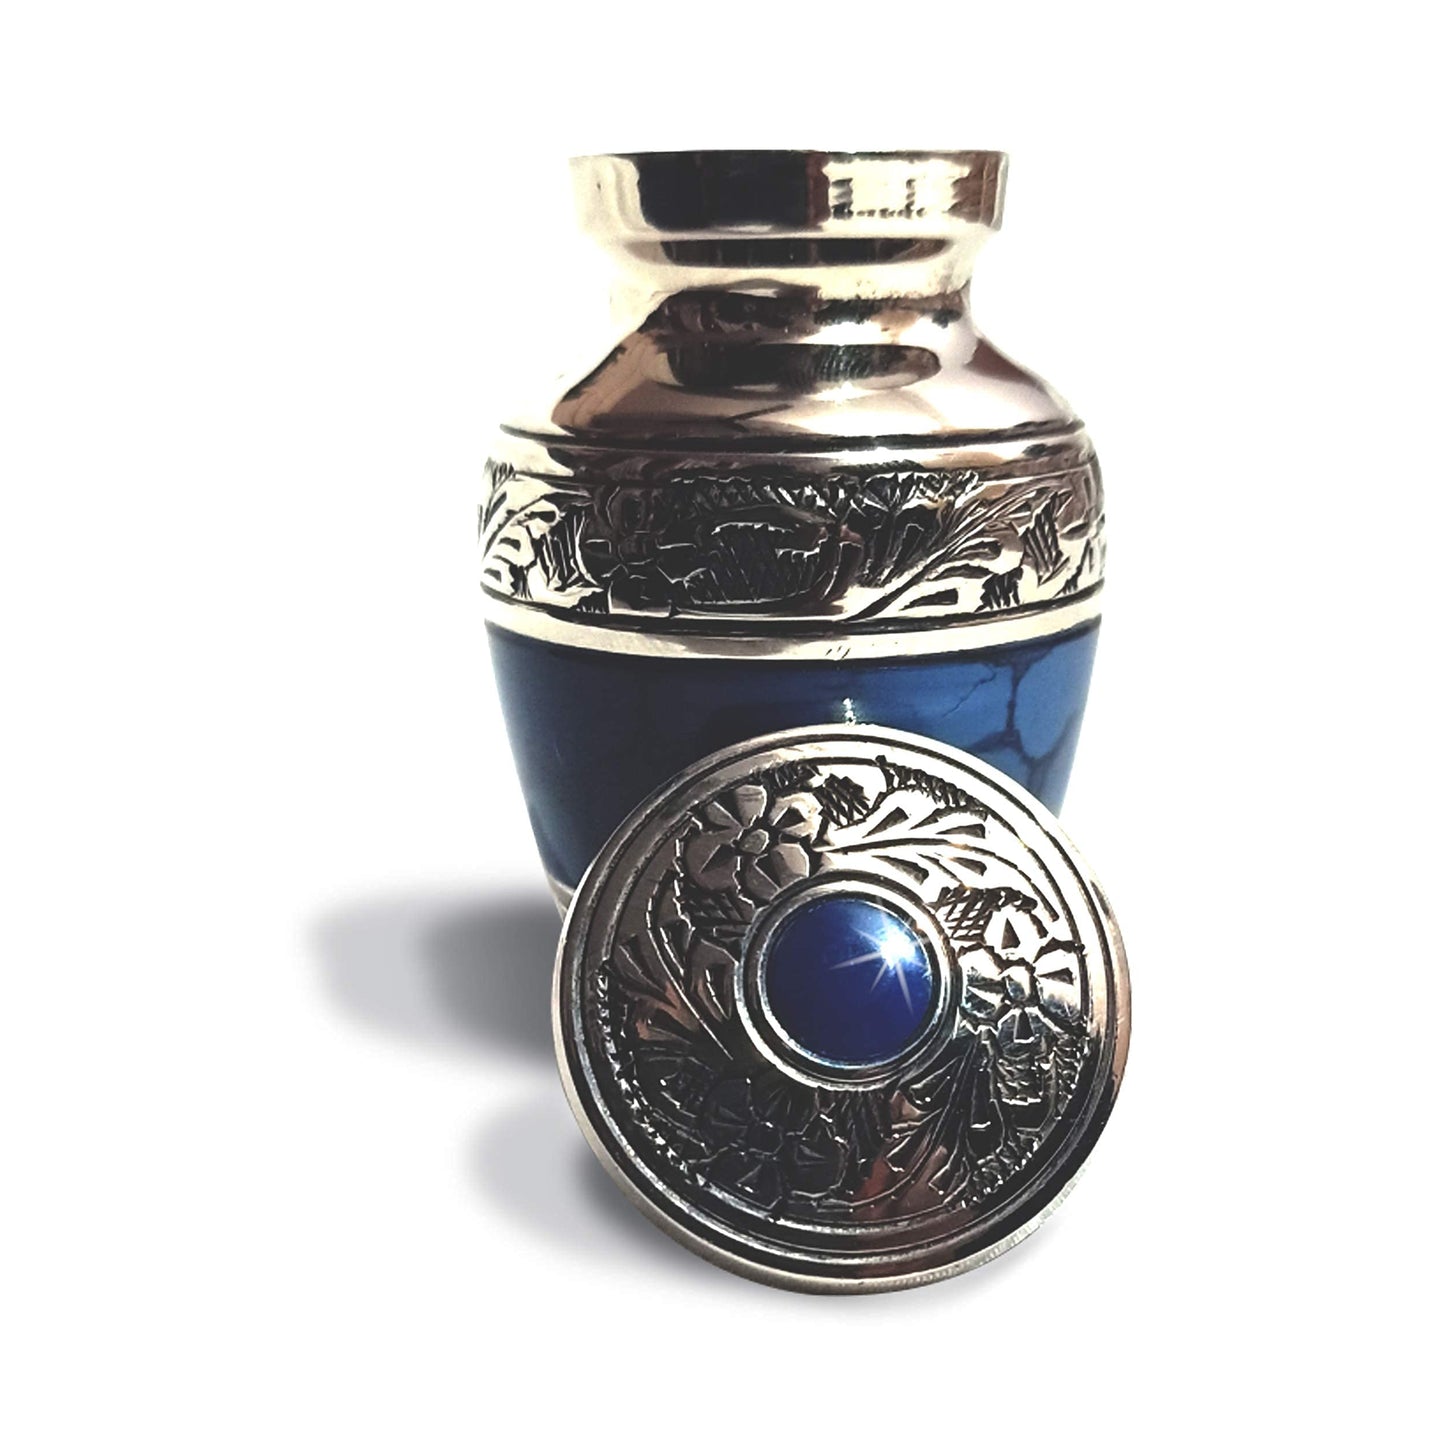 Cherishedly Yours Small Keepsake Urn for Human Ashes with Velvet Heart Case and Funnel - Beautiful Peaceful Dark Blue Brass Hand Engraved Mini Memorial Cremation Urn